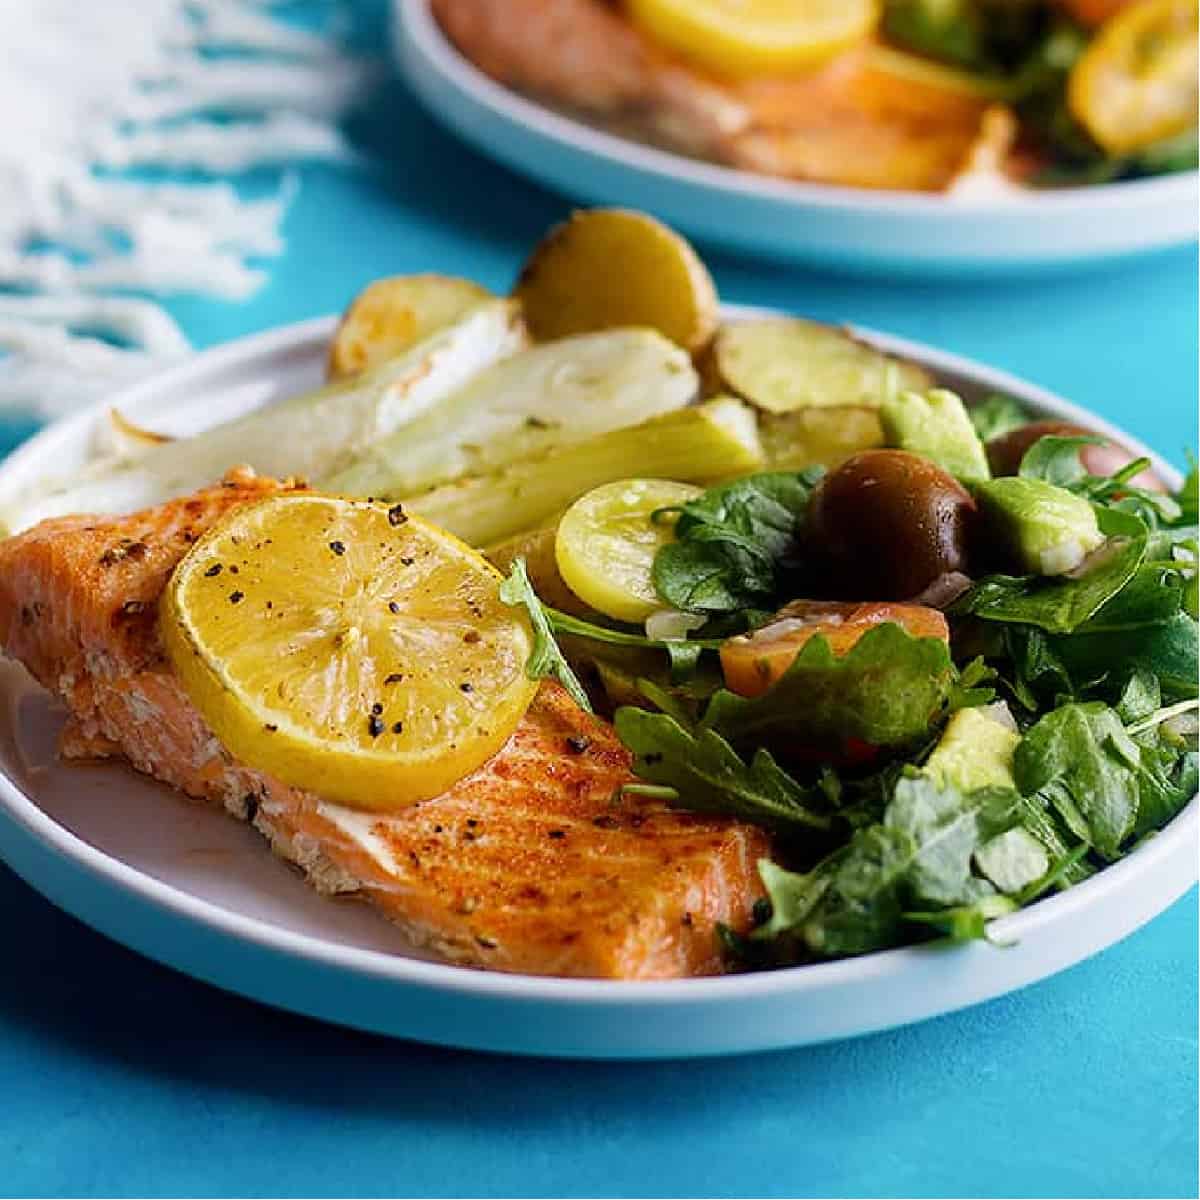 Here is an easy baked salmon fillet recipe. Tender and flavorful salmon fillet are baked on a sheet pan and served with a delicious arugula avocado salad.